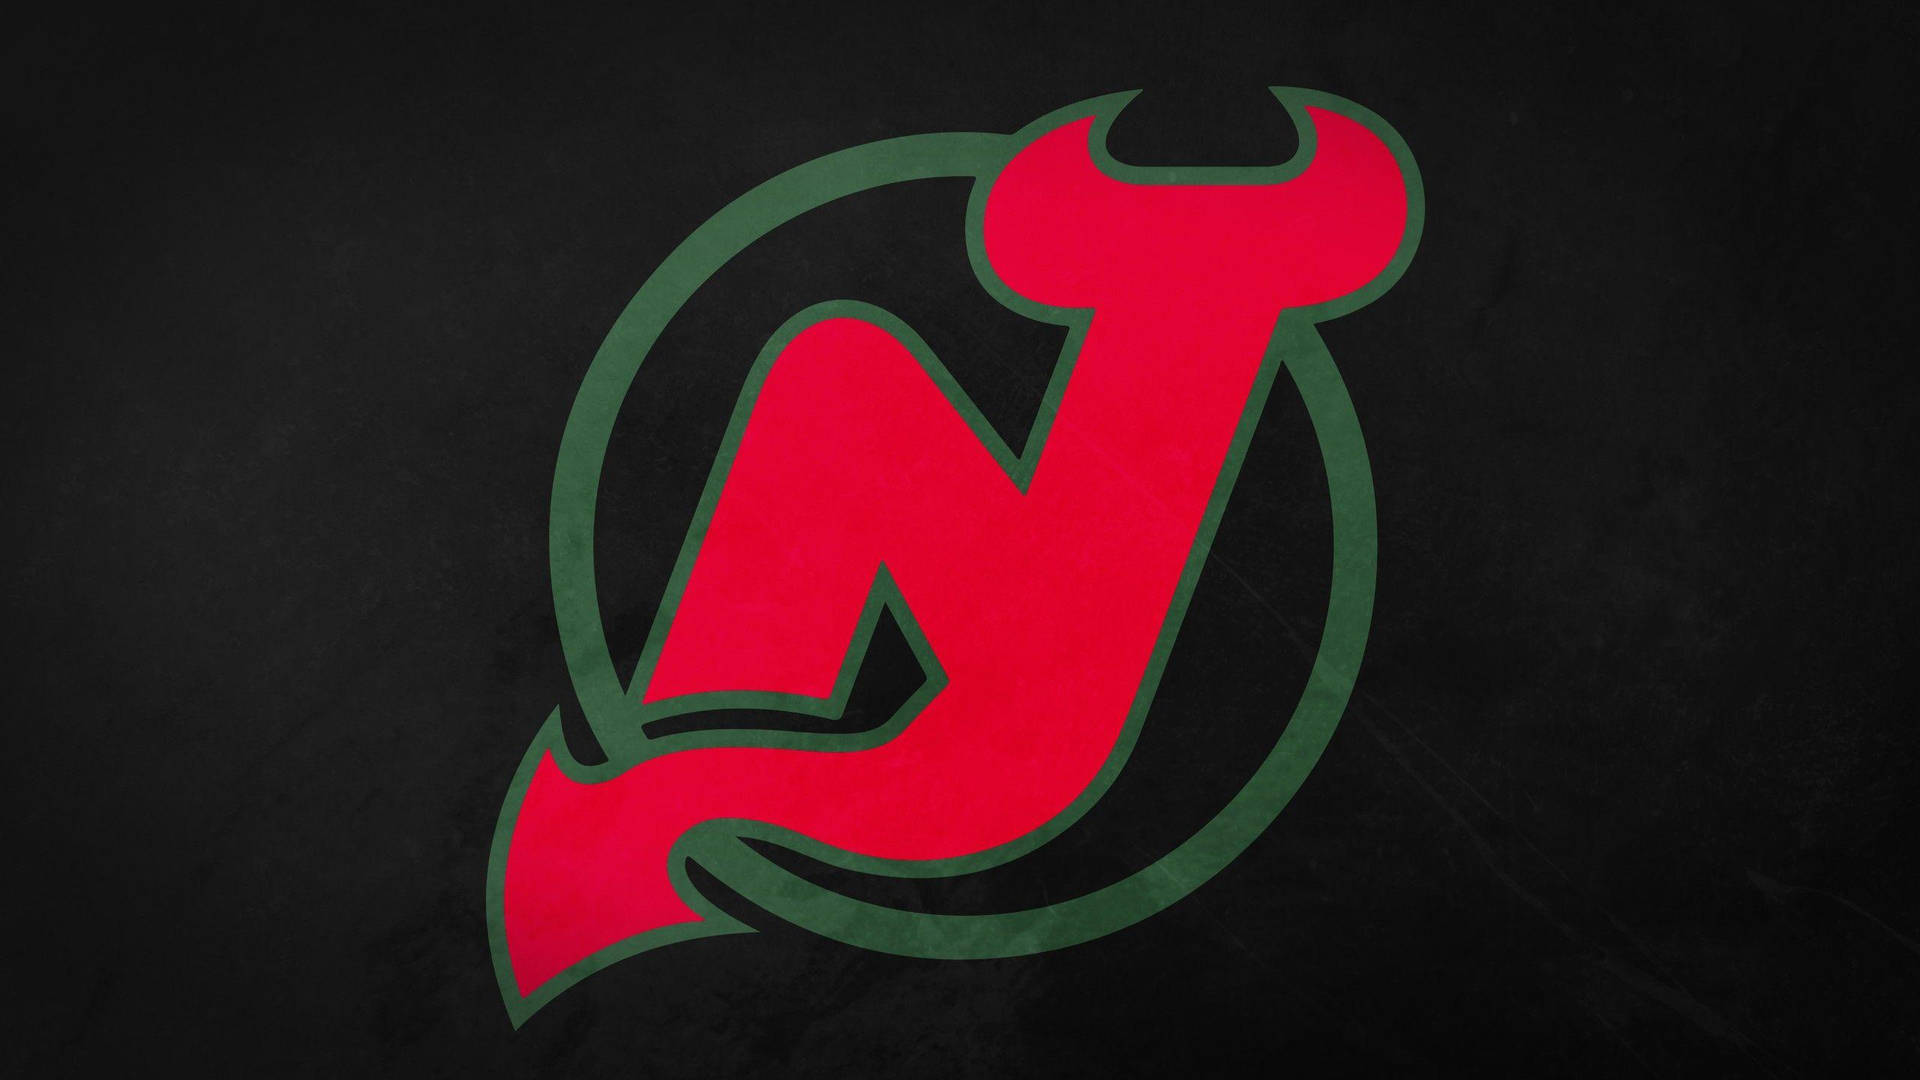 New Jersey Devils Wallpapers - Top Free New Jersey Devils